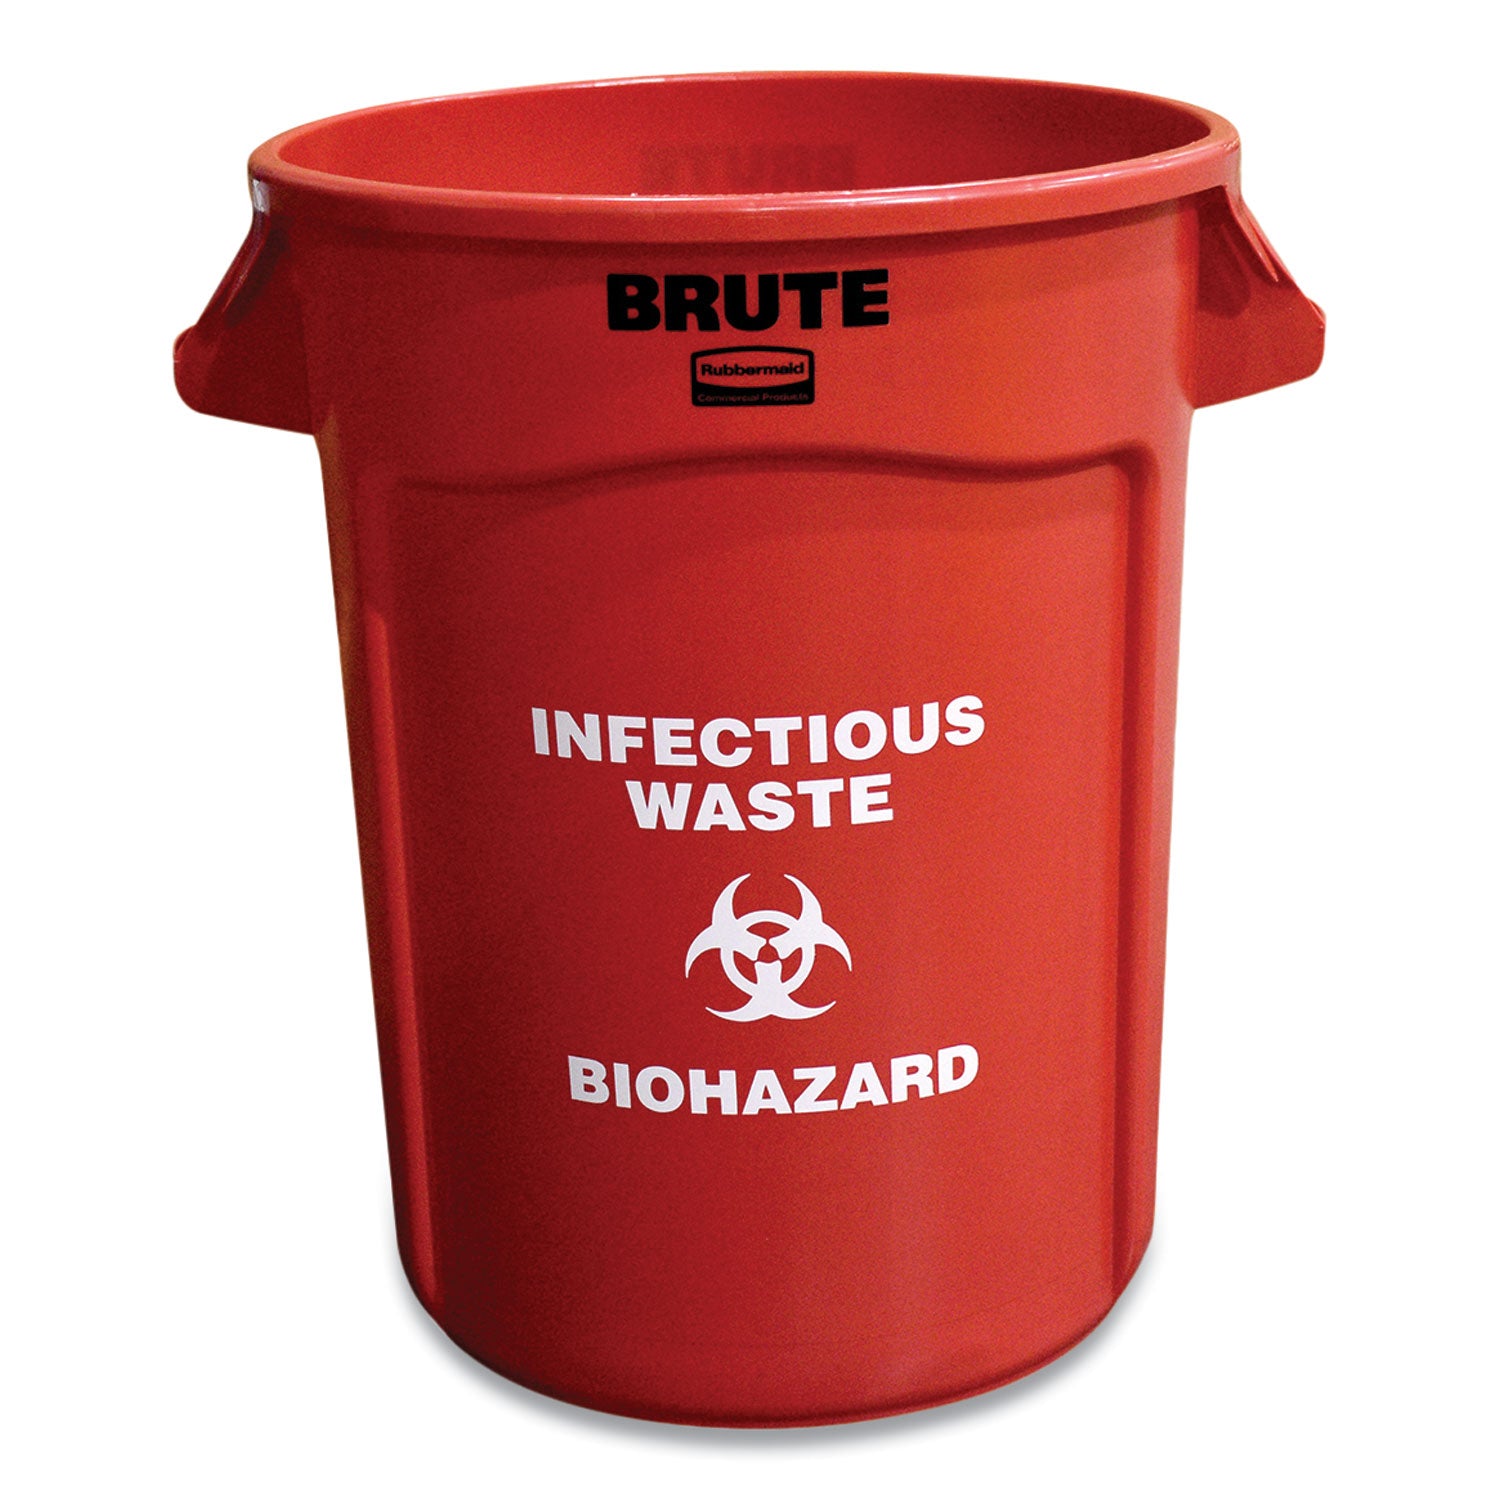 vented-round-brute-container-infectious-waste-biohazard-imprint-32-gal-plastic-red_rcp263294red - 2